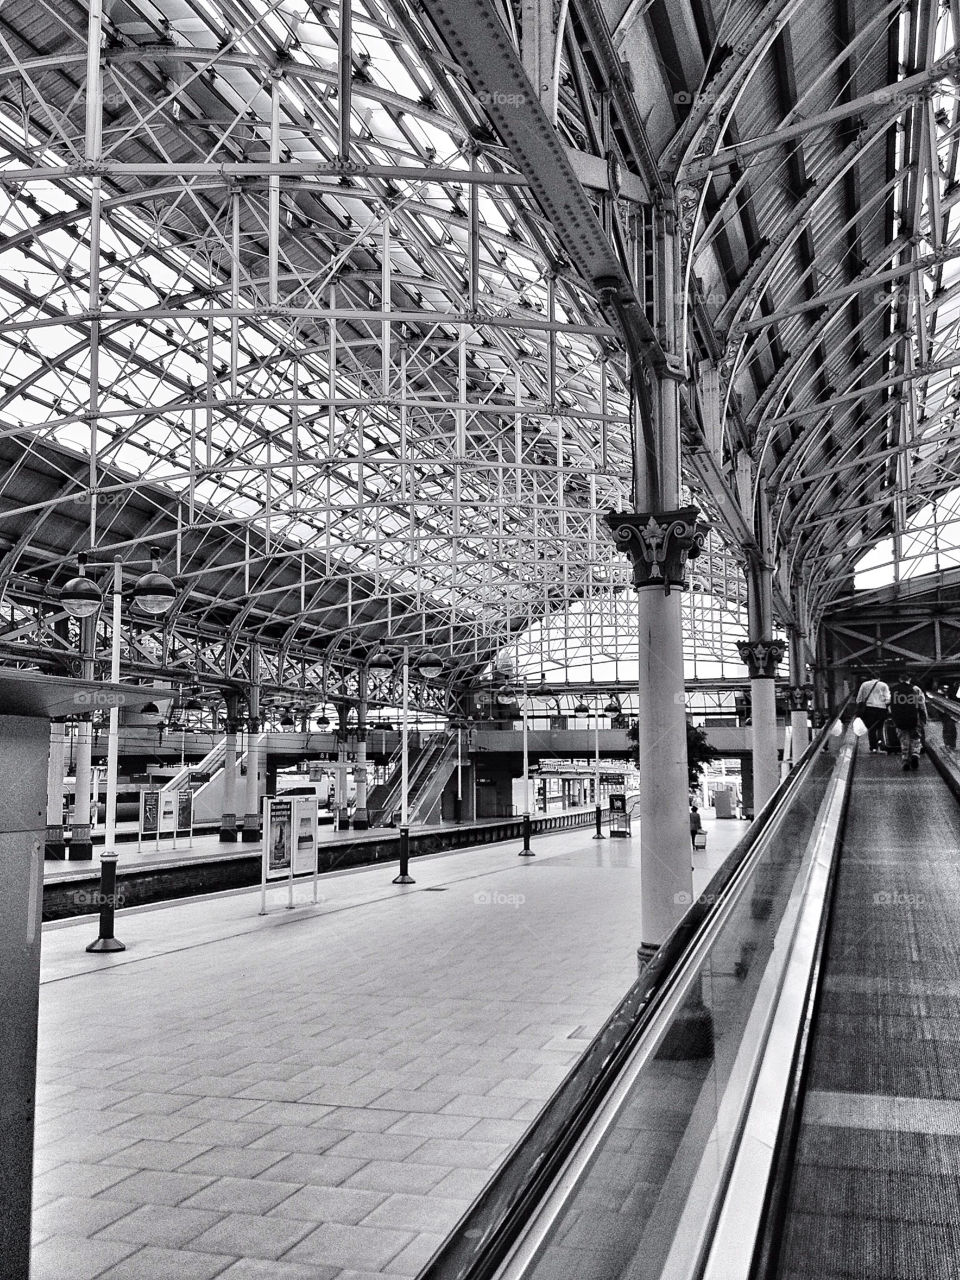 united kingdom train architecture station by paul2079